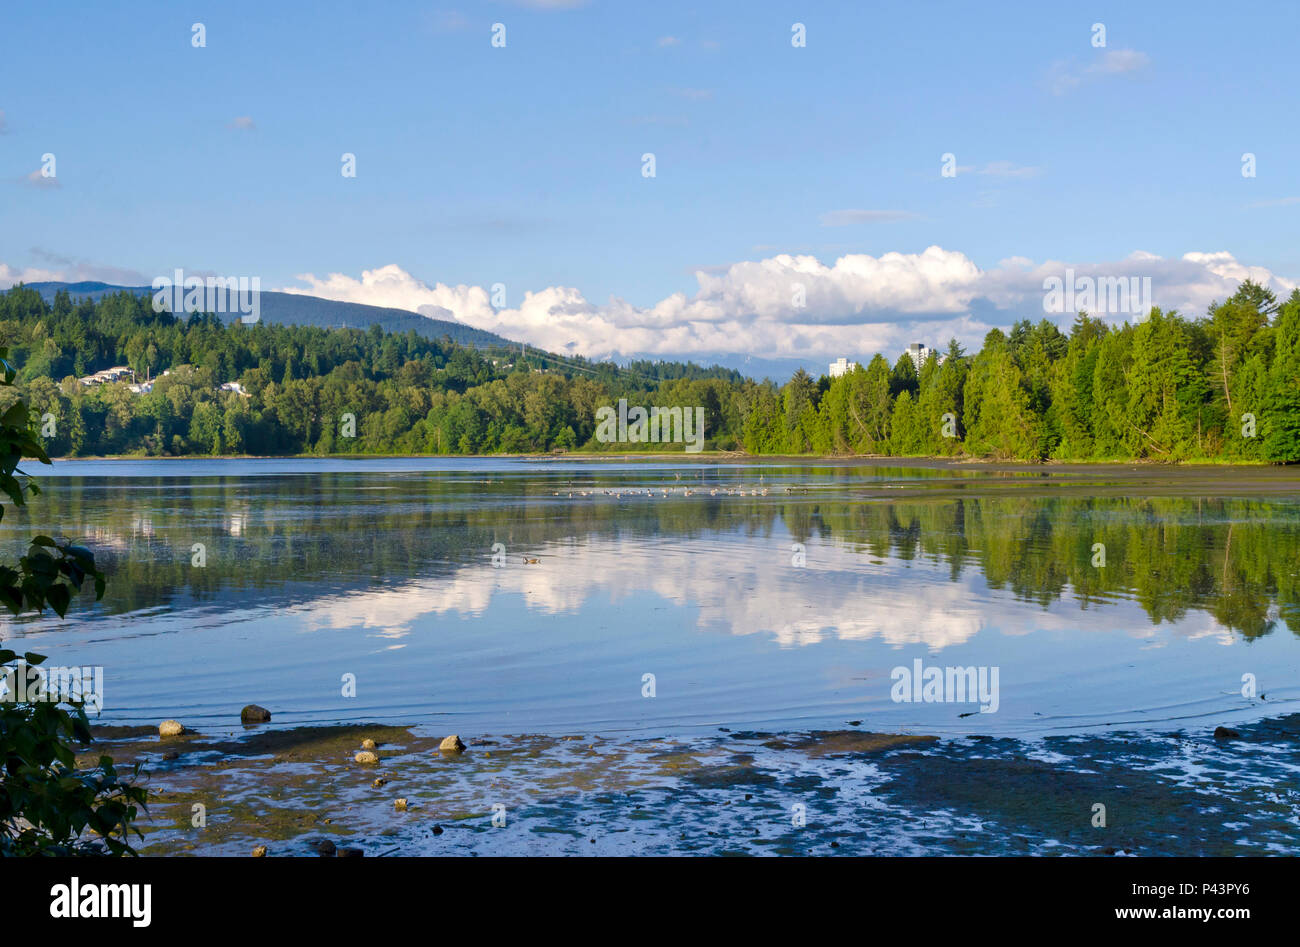 Burrard Inlet in Port Moody, BC, Canada, as viewed from Rocky Point Park.   Urban nature in Metro Vancouver suburb. Stock Photo